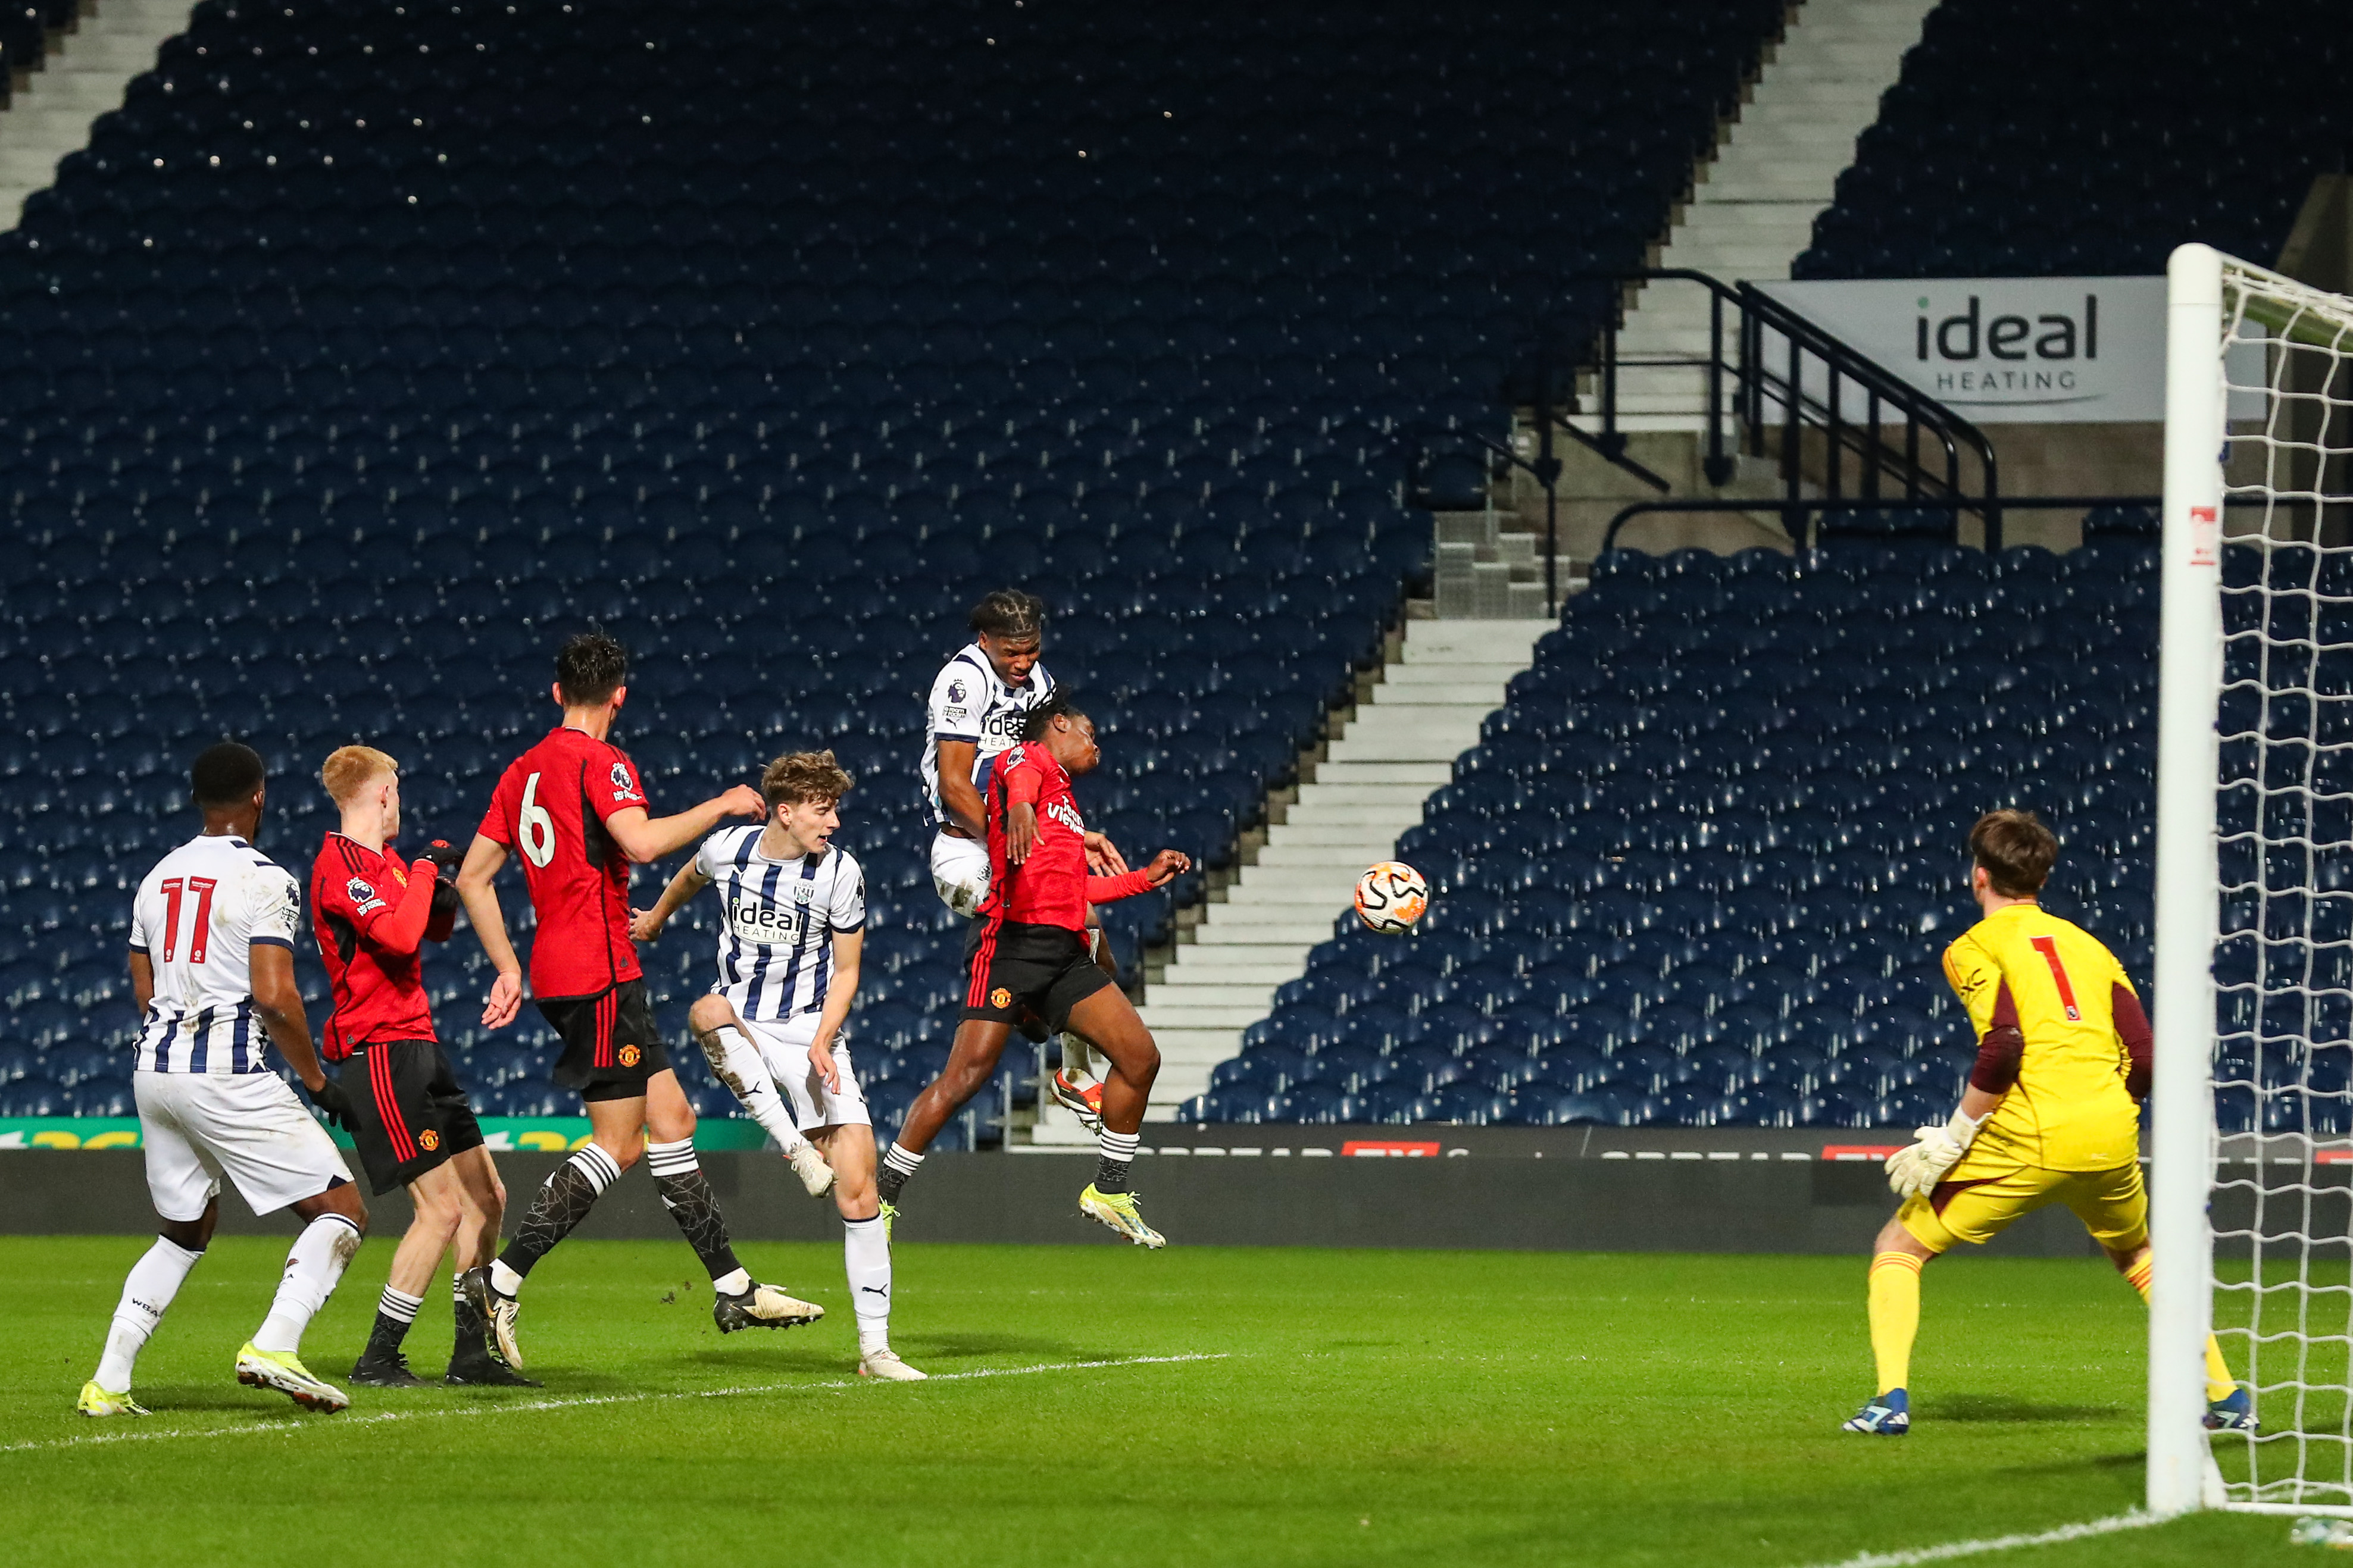 Several Albion and Man United PL2 players jump for the ball in the box as a cross is delivered 